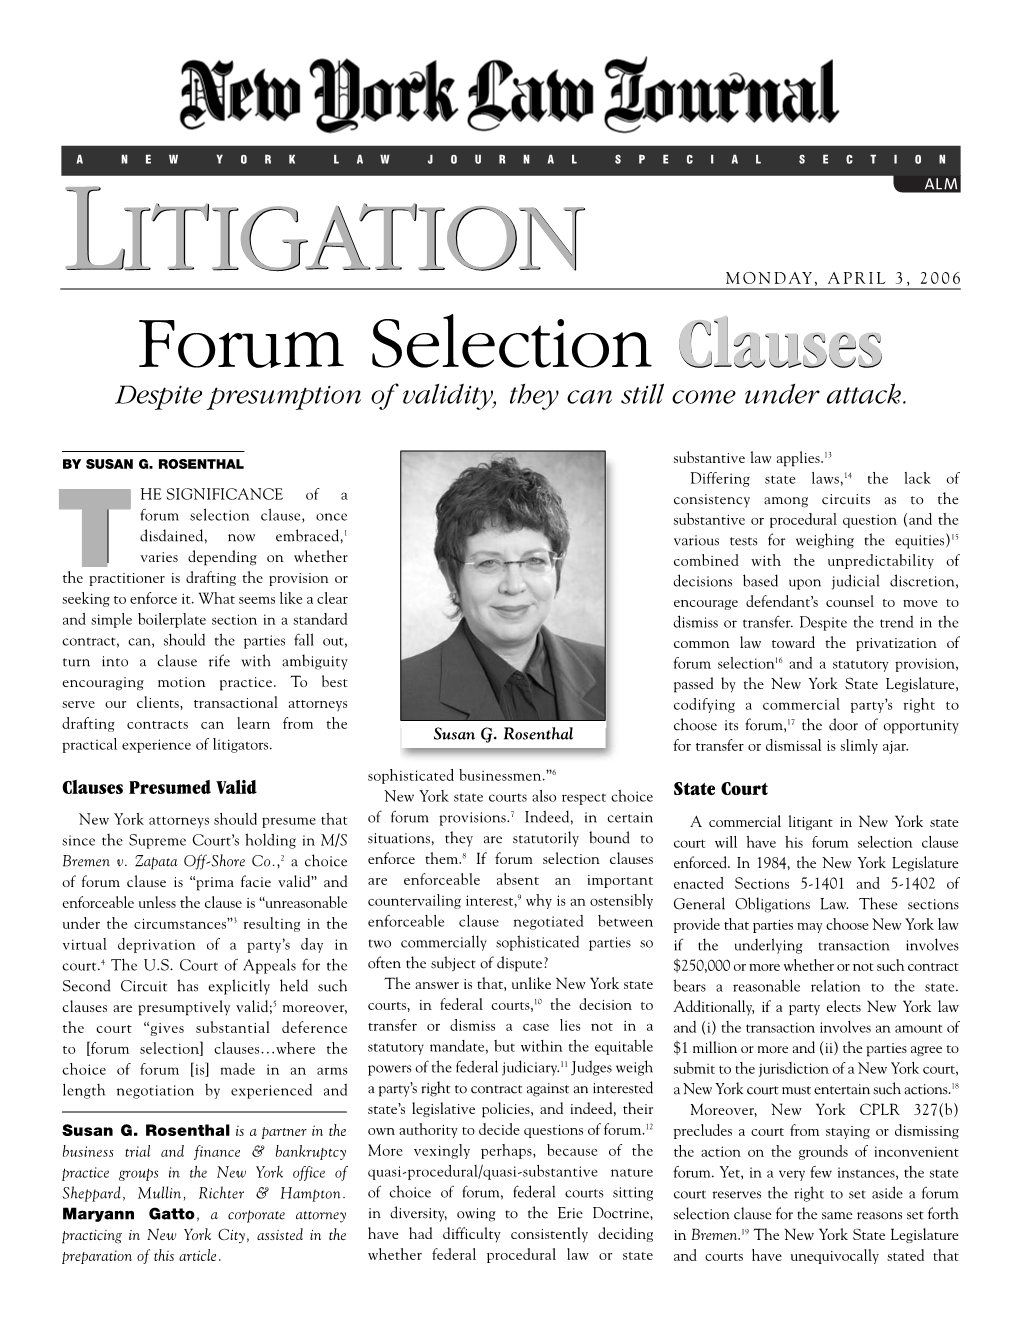 Forum Selection Clauses Despite Presumption of Validity, They Can Still Come Under Attack